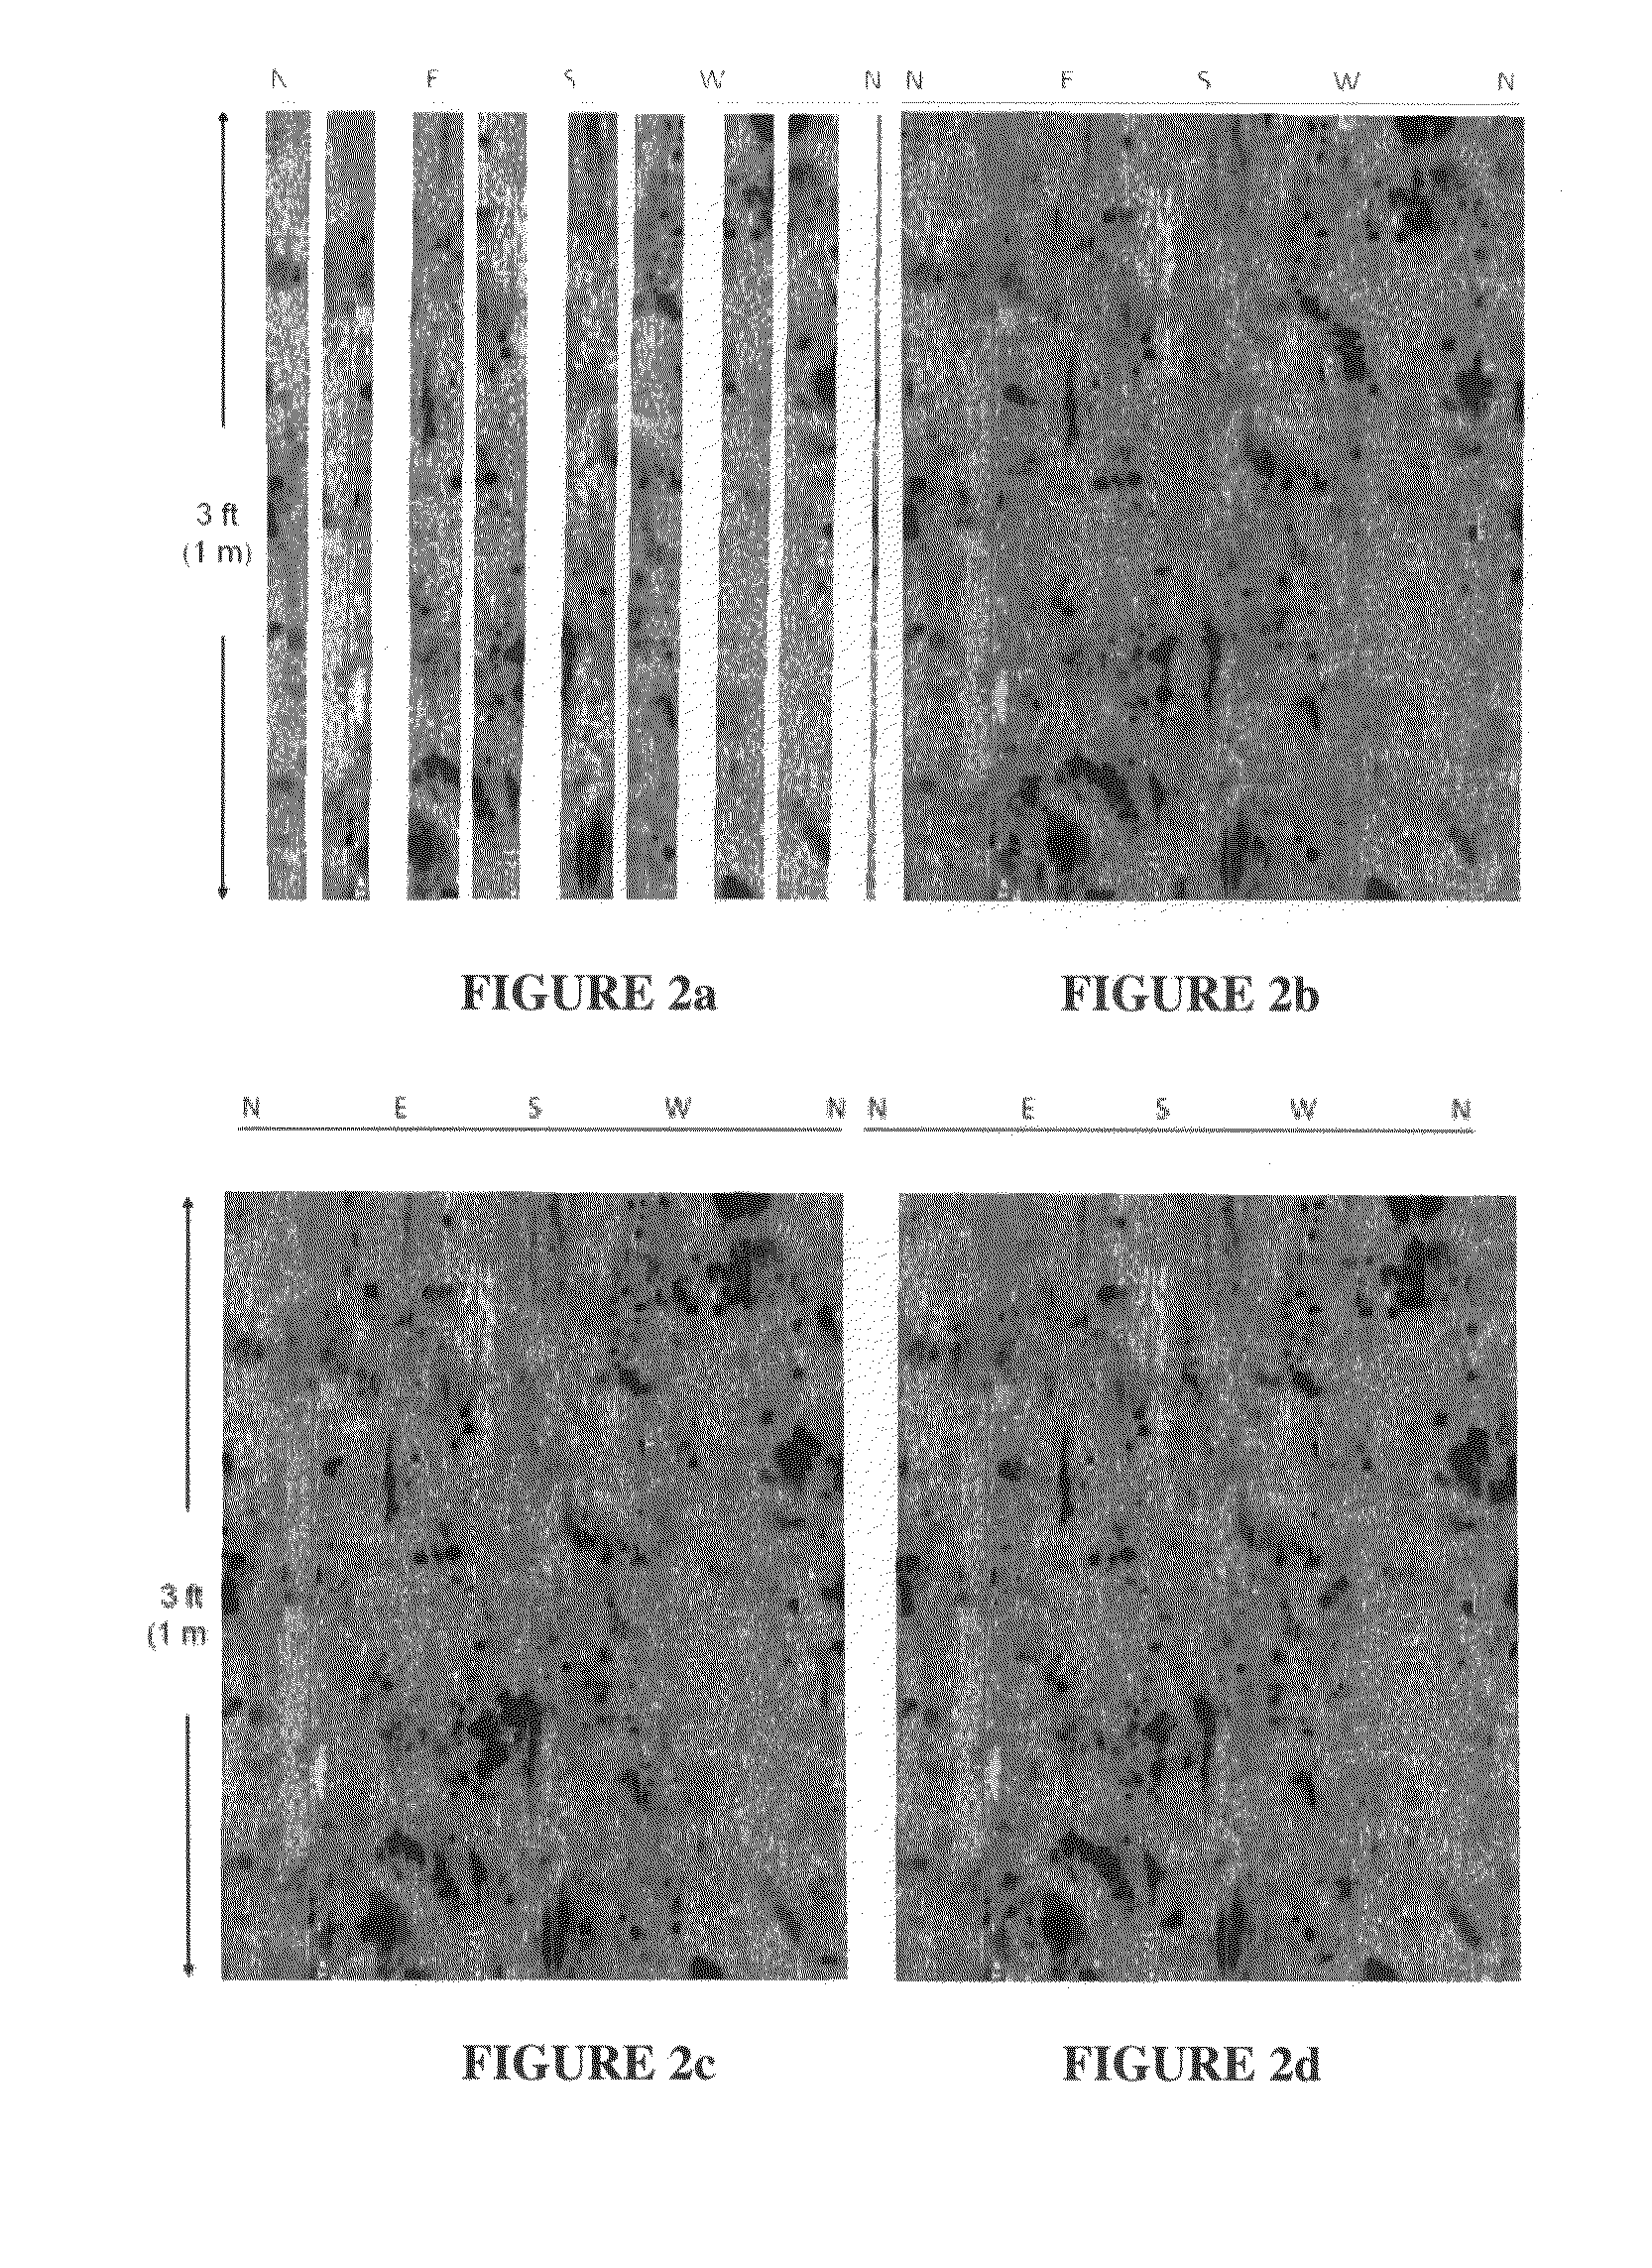 Method to generate numerical pseudocores using borehole images, digital rock samples, and multi-point statistics